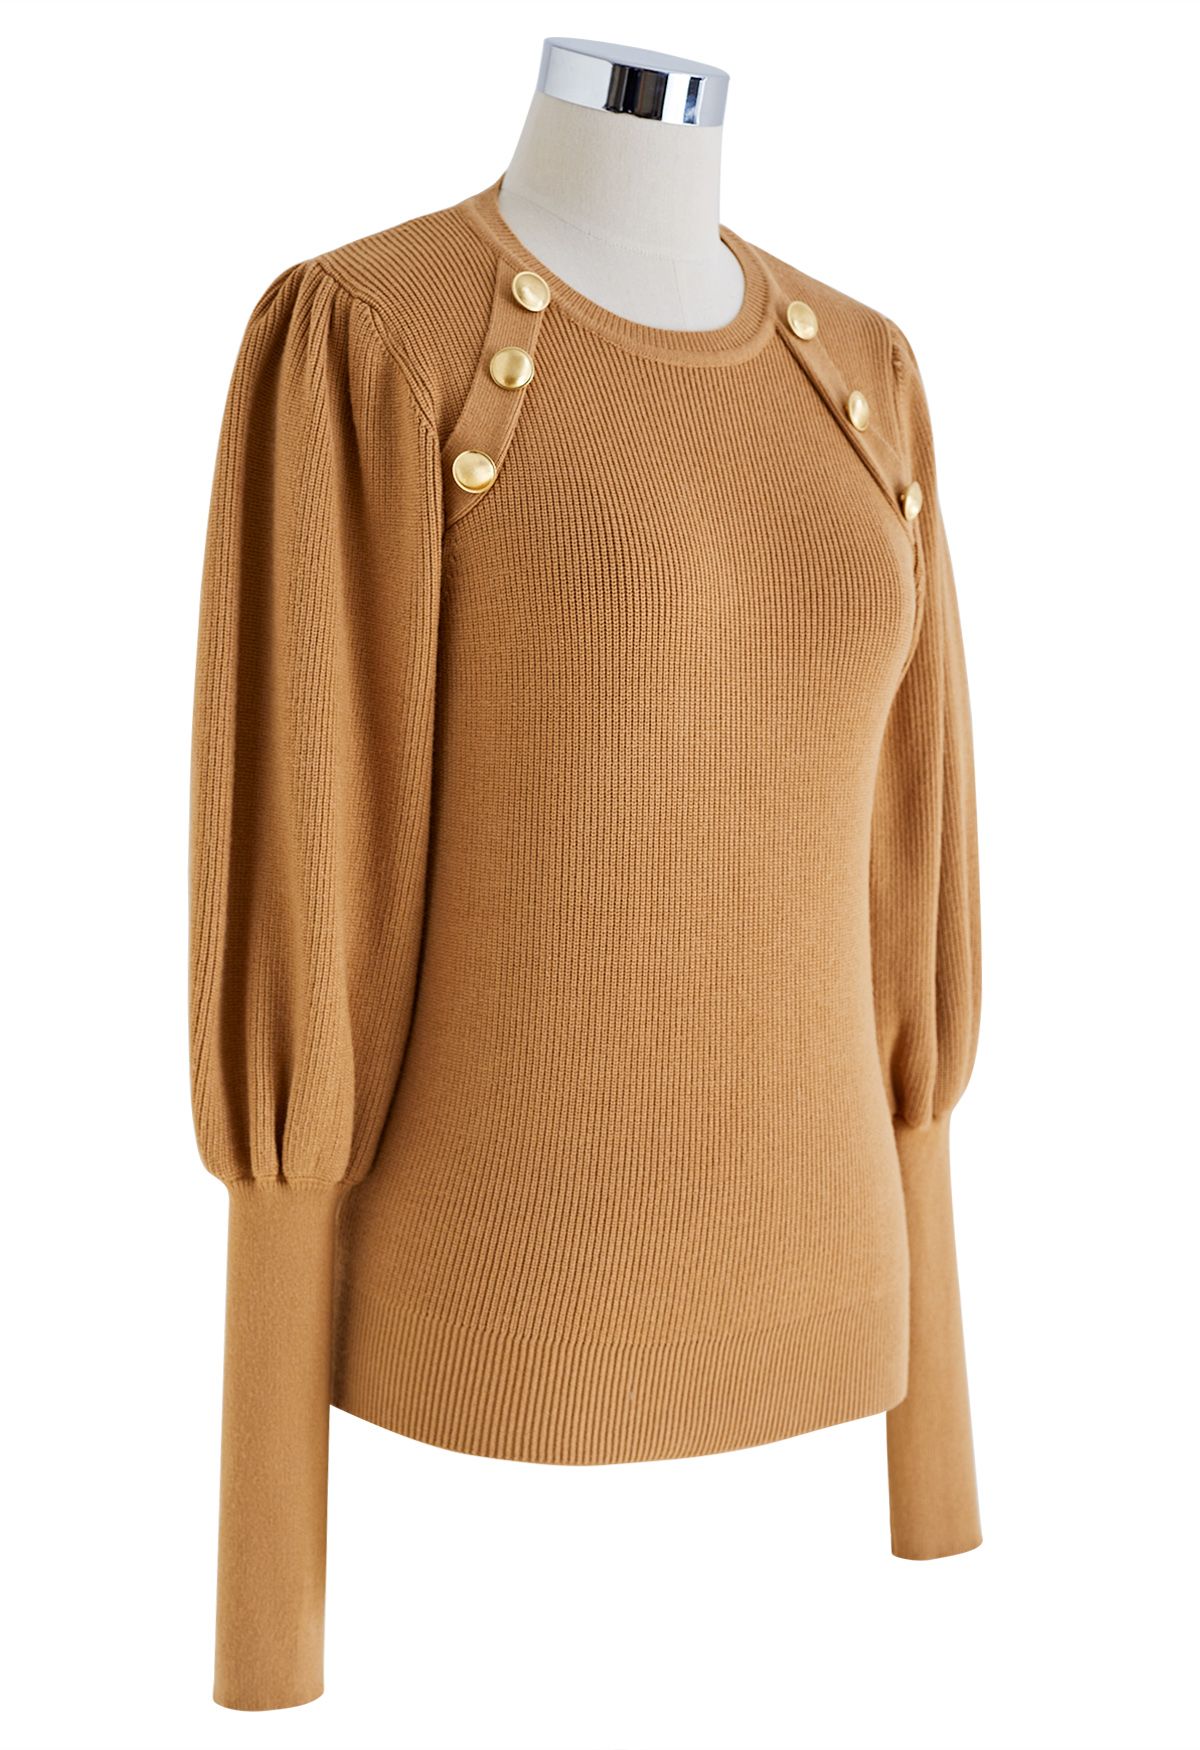 Bubble Sleeves Button Trimmed Knit Top in Tan